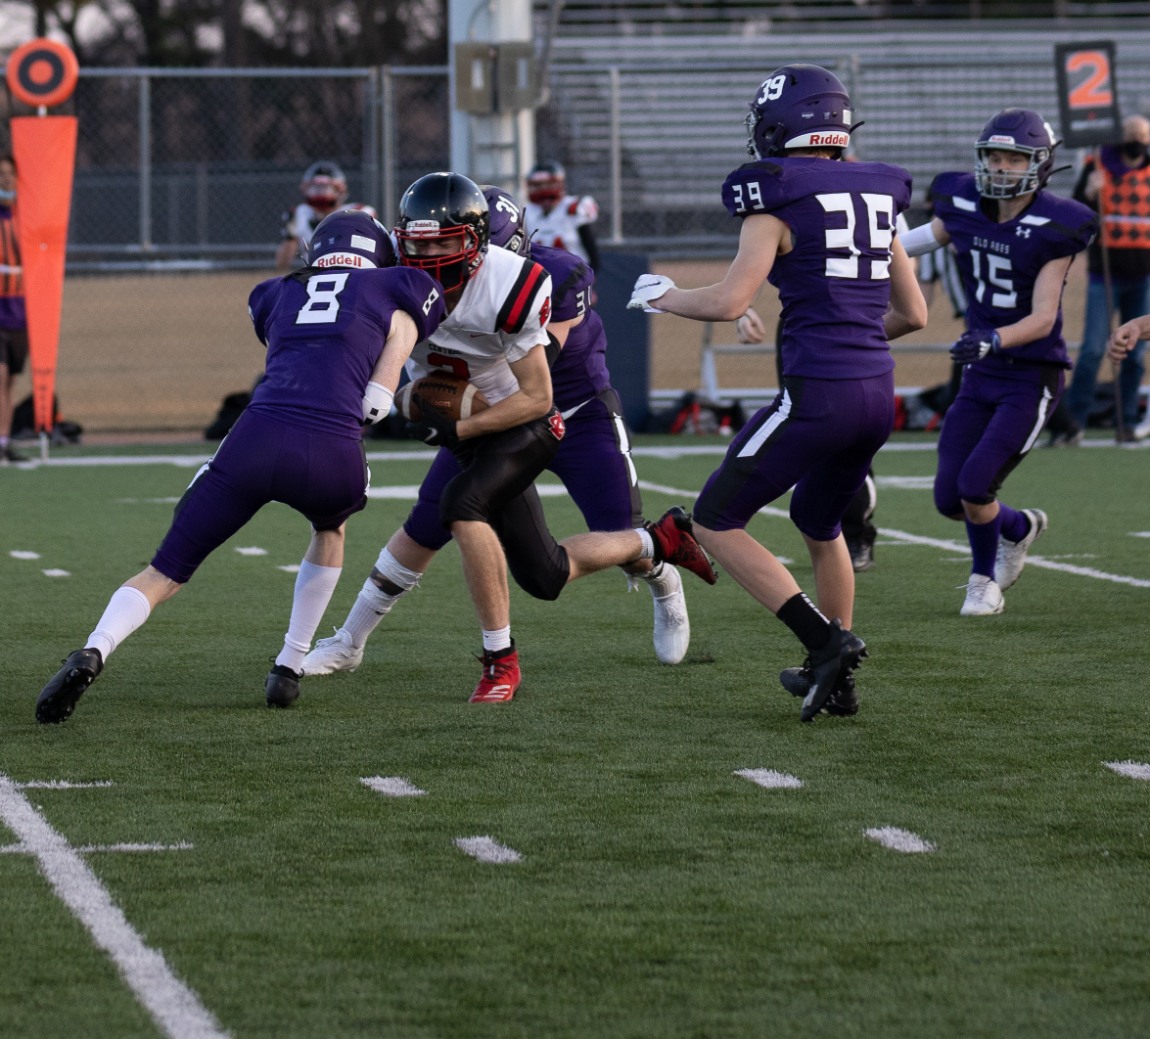 Eau-Claire-Memorial-JV-Football-LaCrosse-Central-at-Home-3-29-21-1500